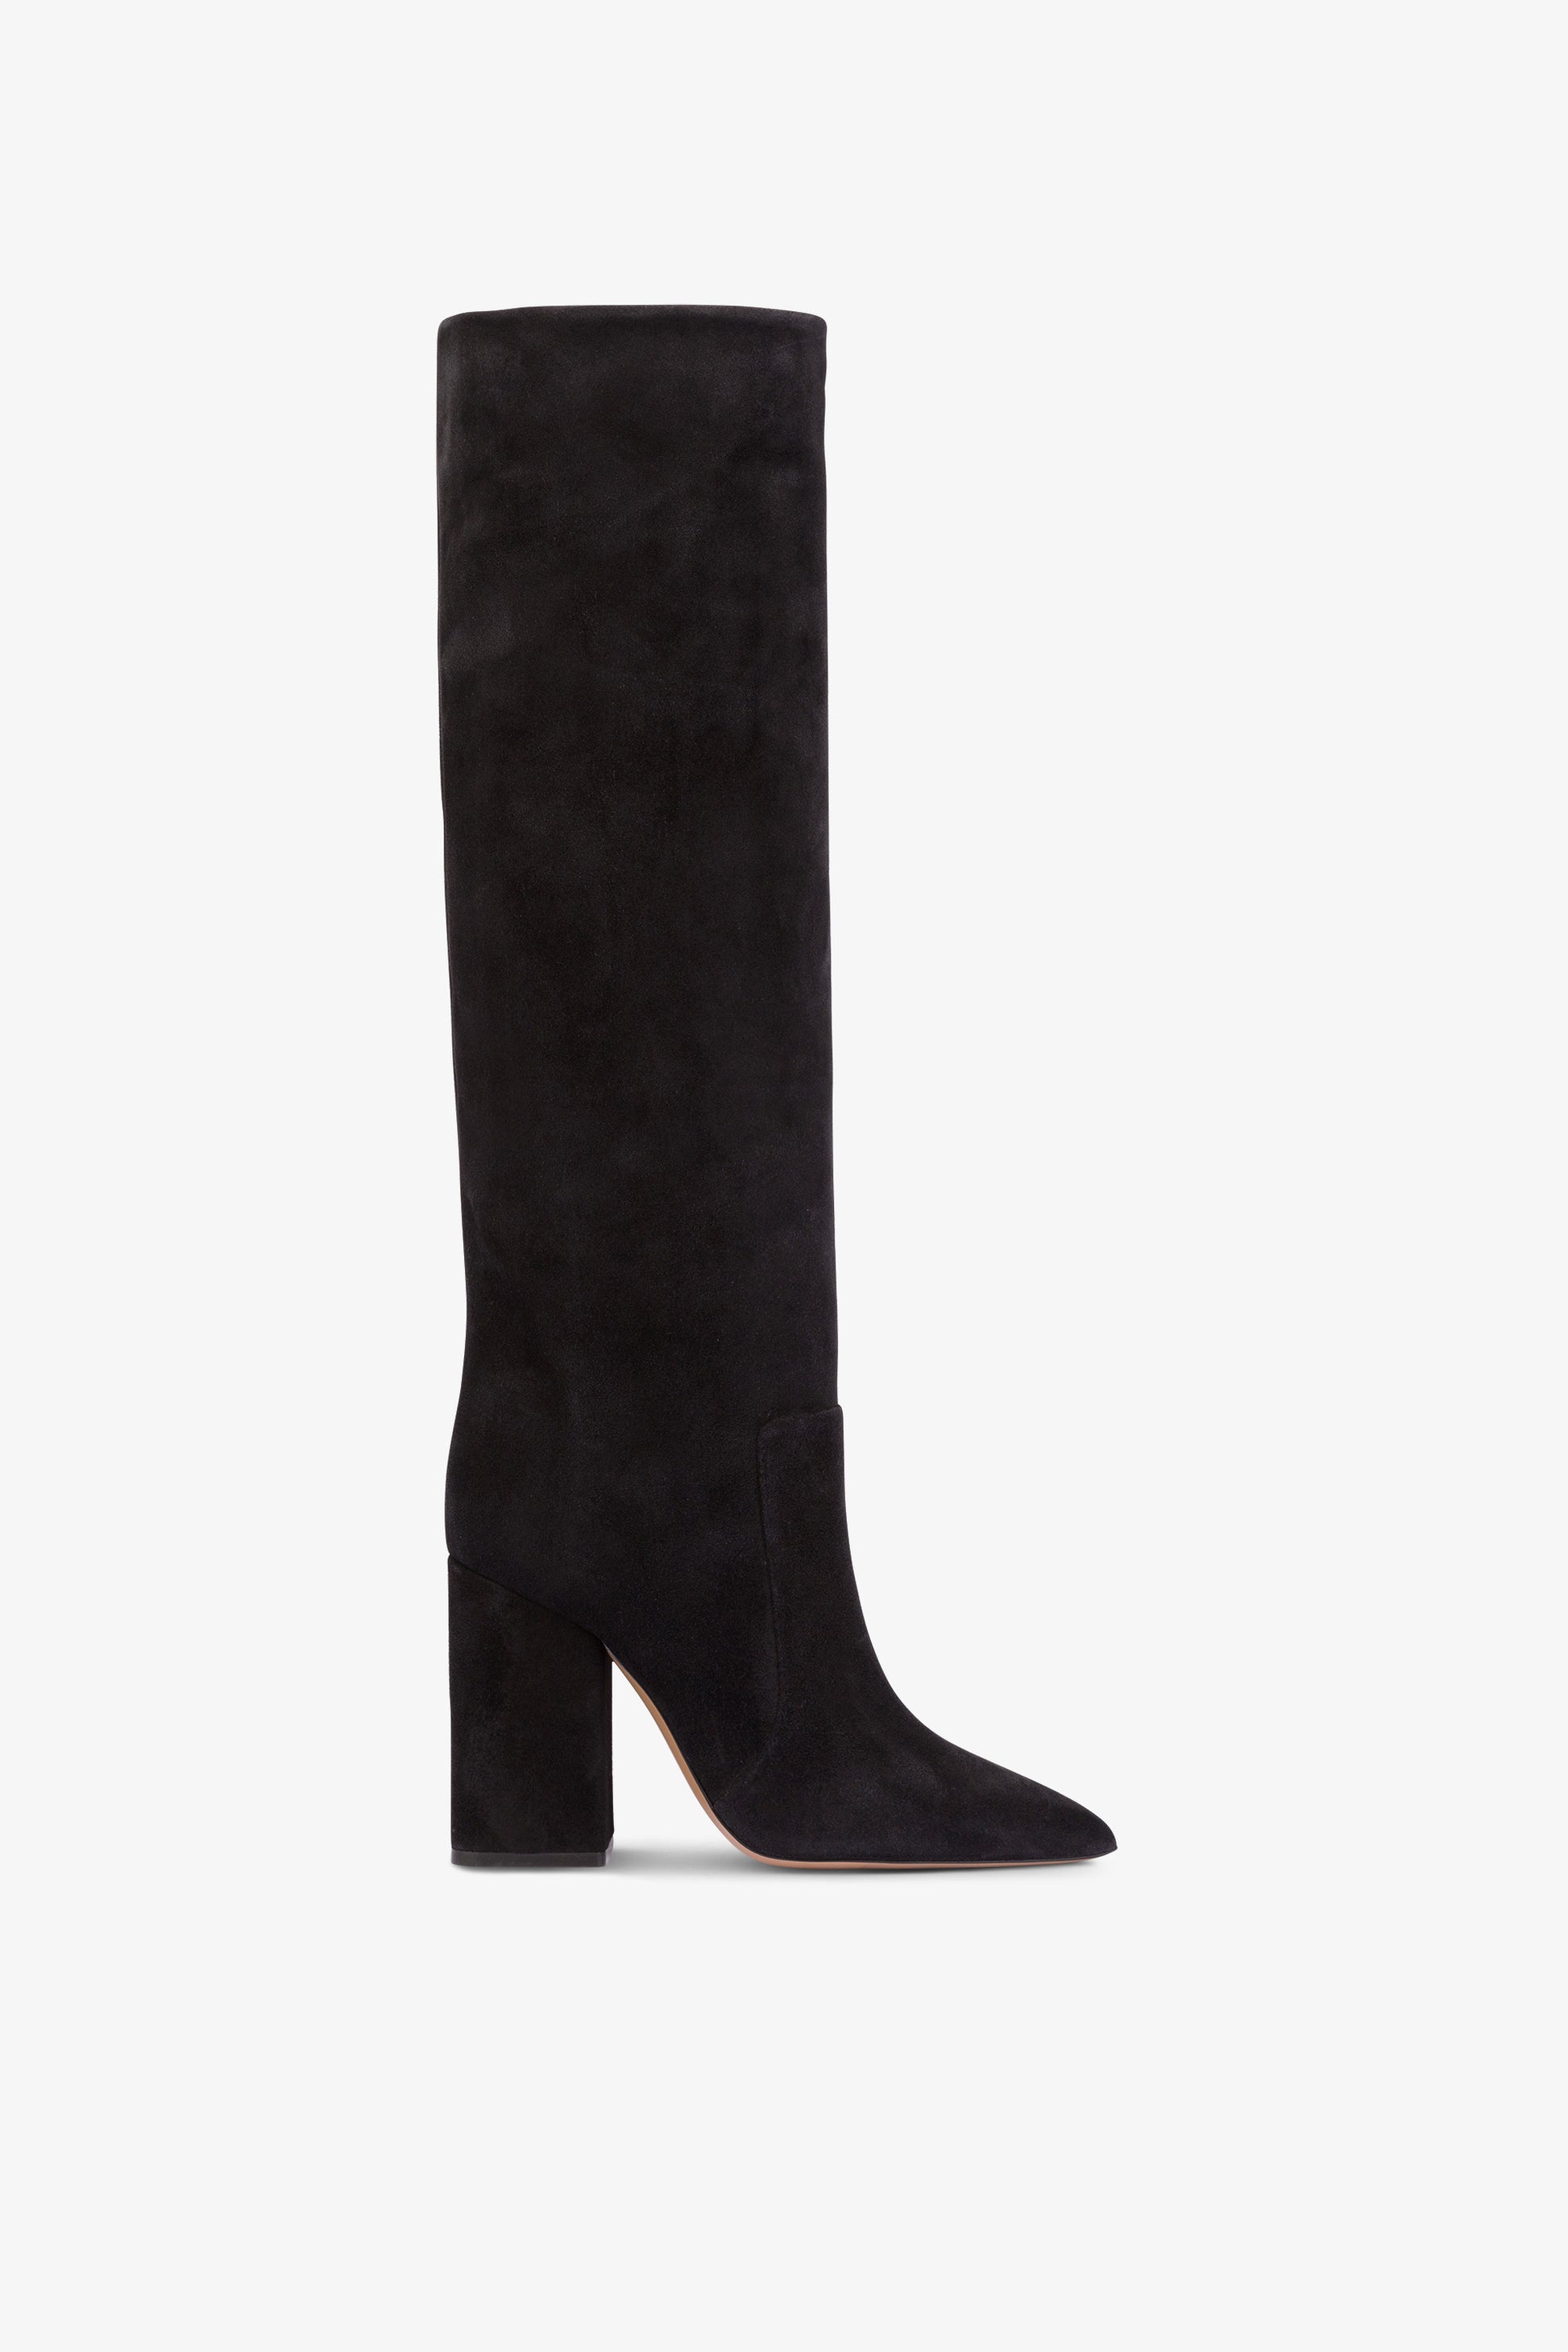 Knee-high boots in soft off-black suede leather